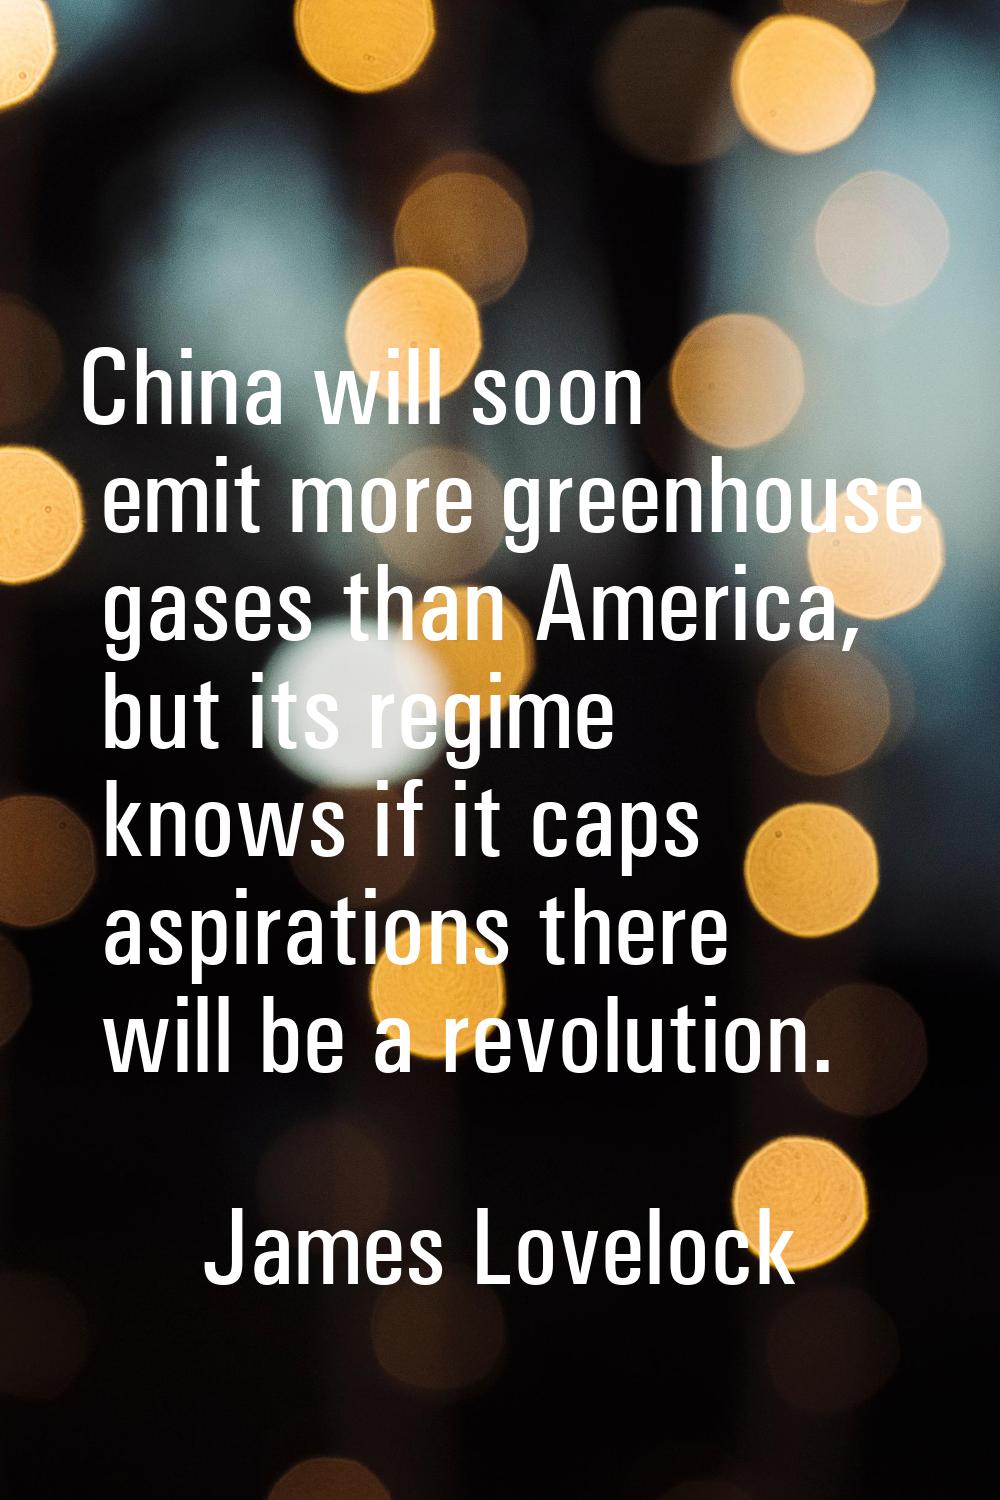 China will soon emit more greenhouse gases than America, but its regime knows if it caps aspiration